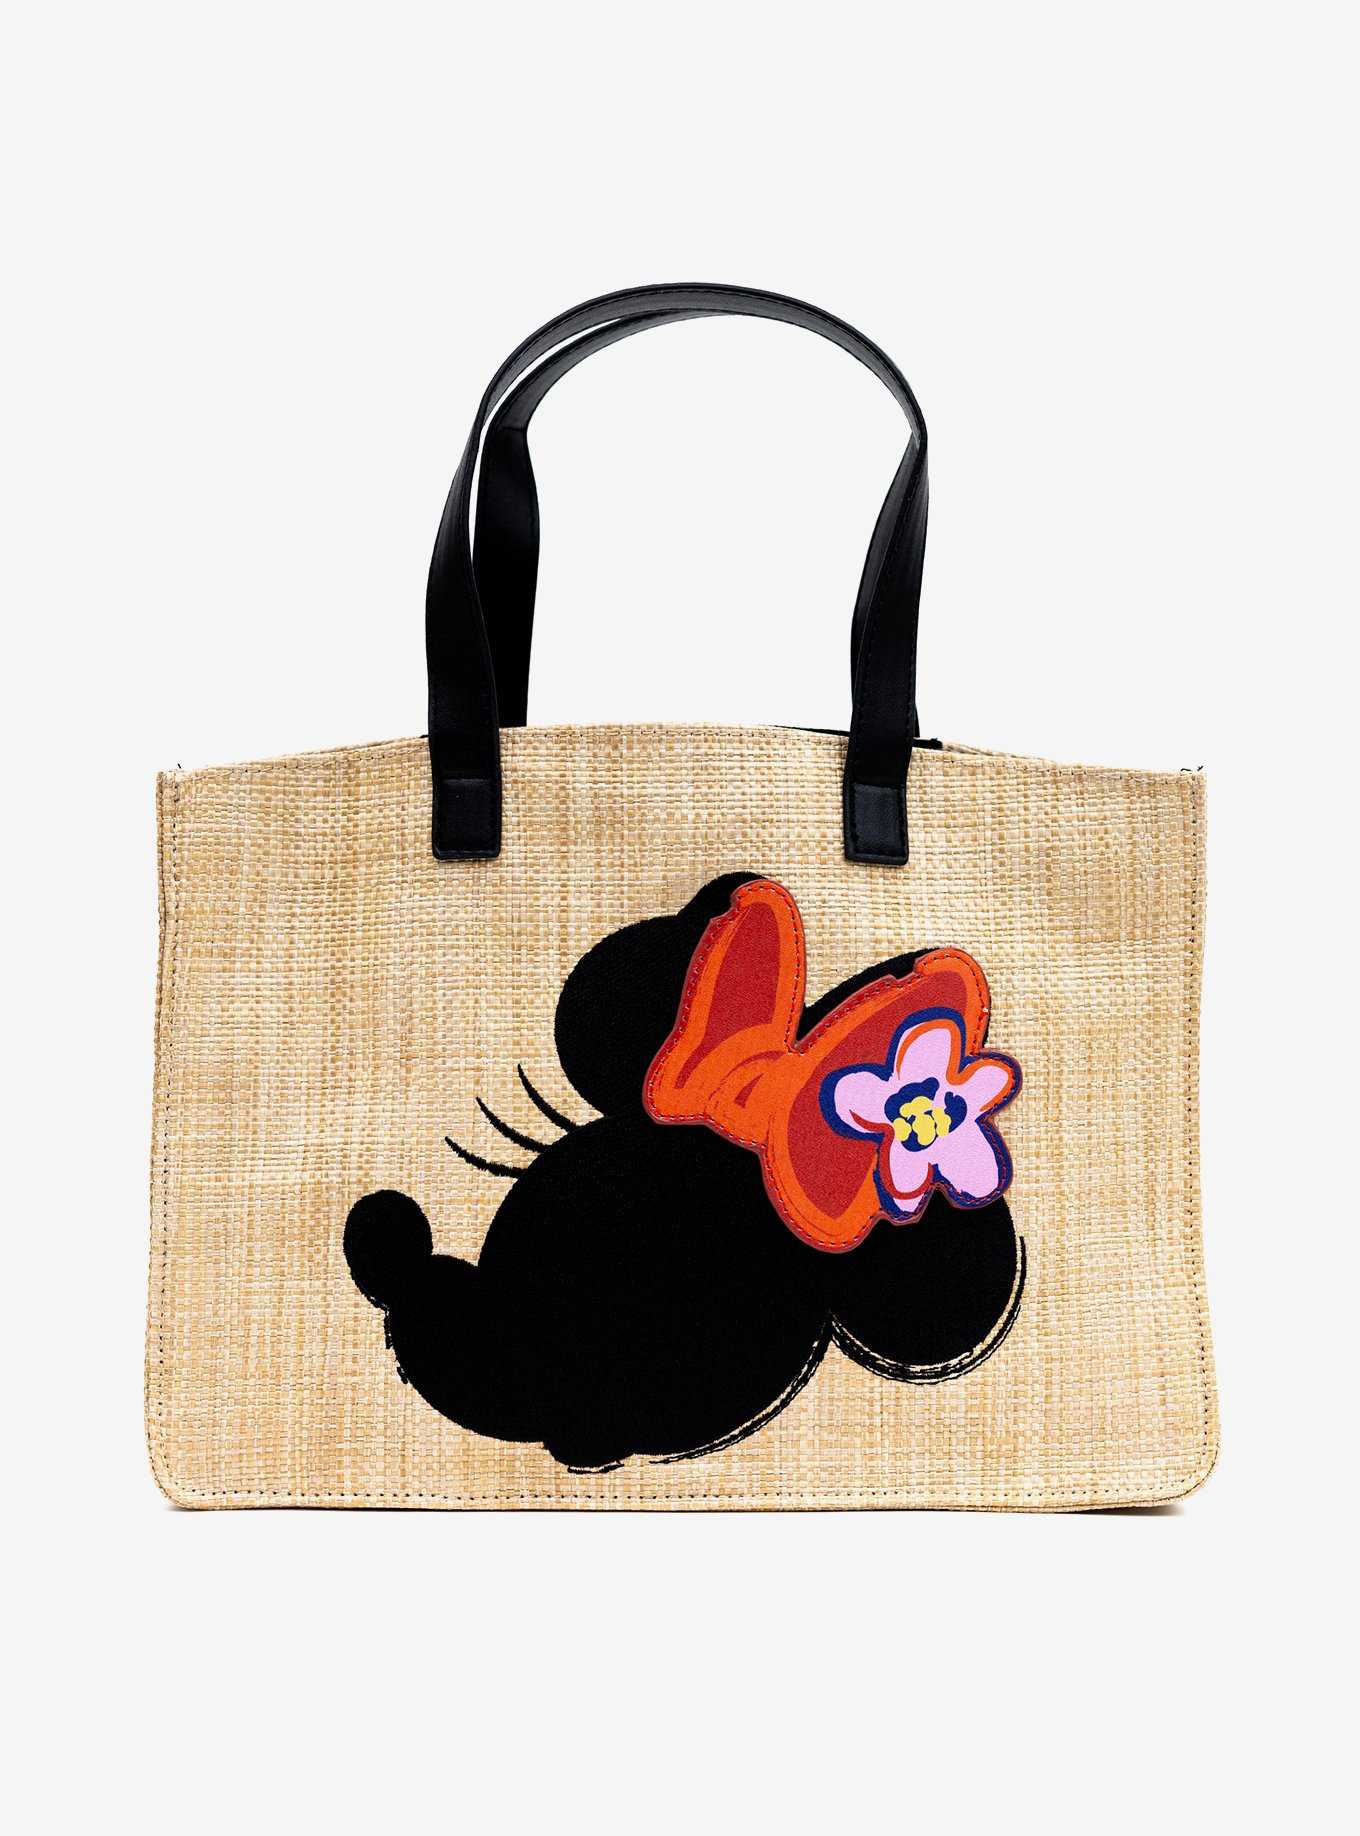 Disney Minnie Mouse Embroidered Bow Straw Tote Bag